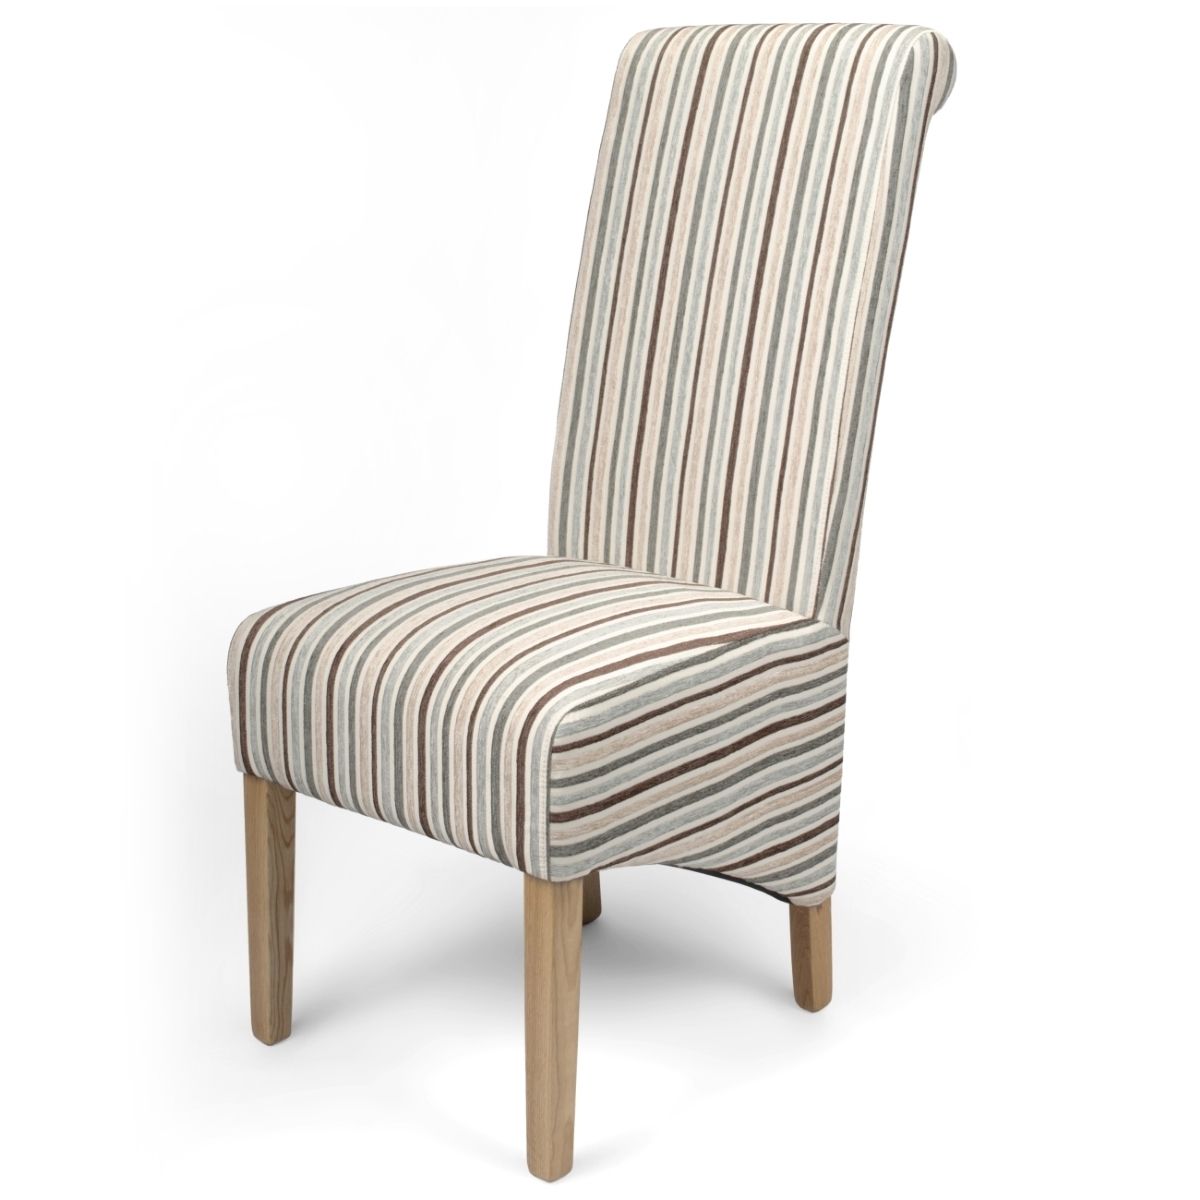 Blue Stripe Dining Chairs Within Most Recently Released Dining Chairs – Krista Stripe Dining Chairs In Duck Egg Blue (View 4 of 20)